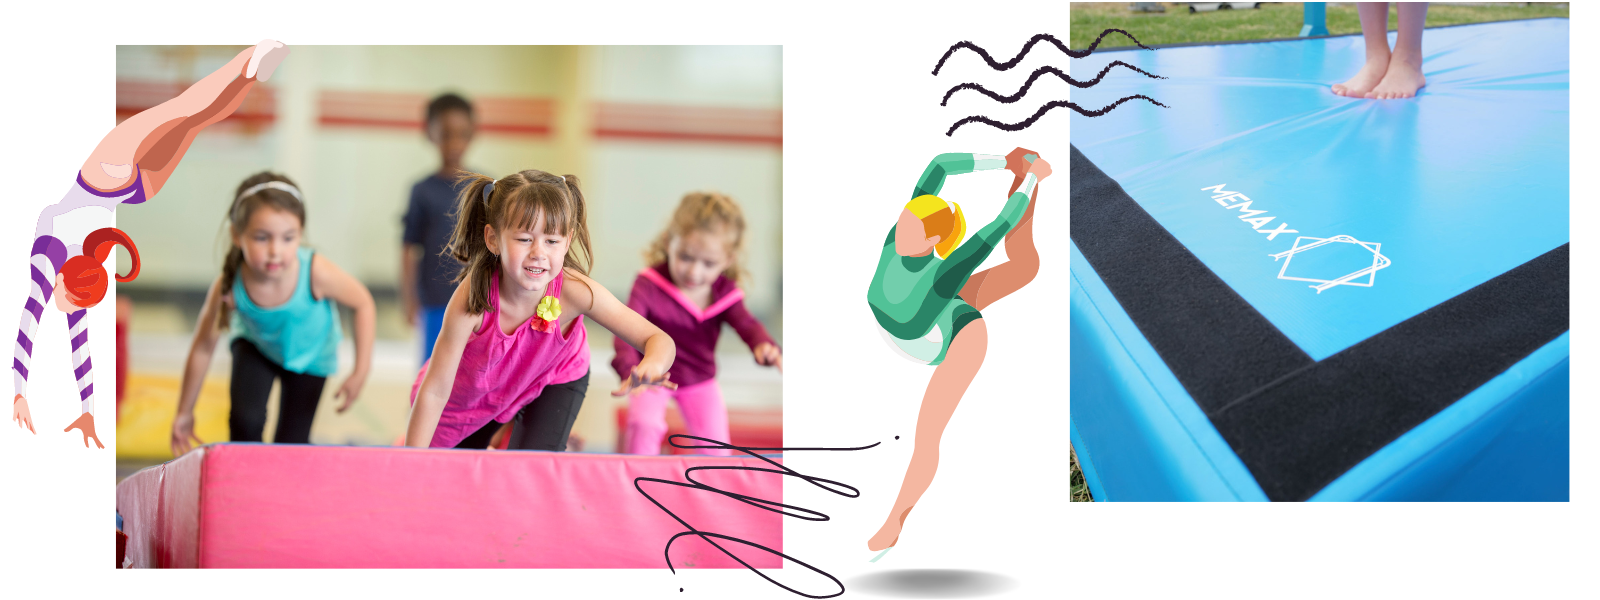 The Best Gymnastic Tumbling Mats For At-Home Use